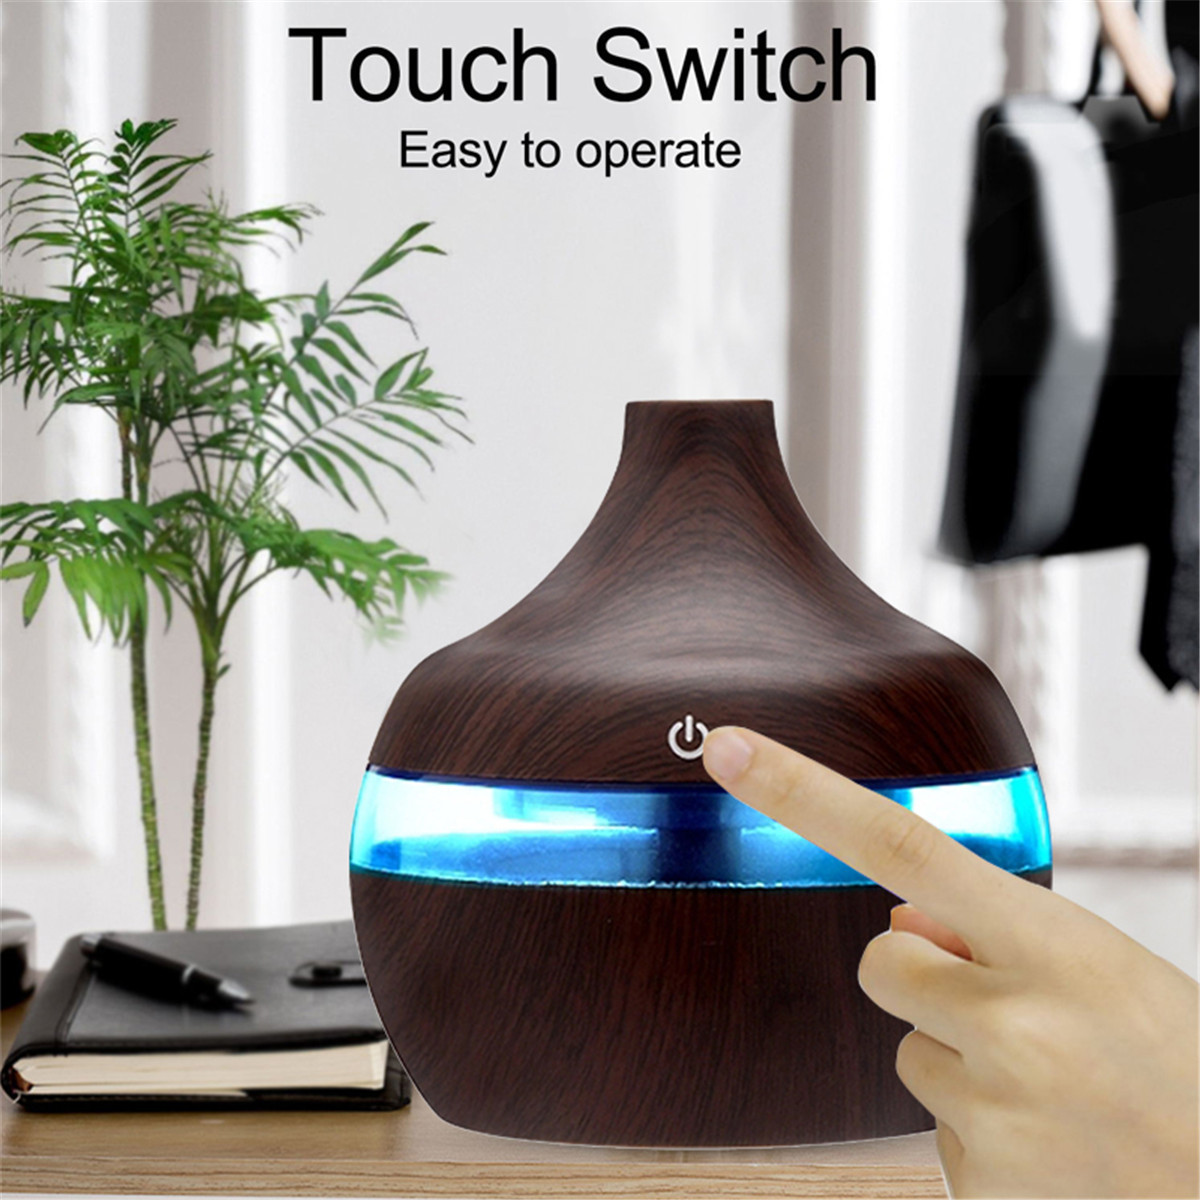 300ml Electric Ultrasonic Air Mist Humidifier Purifier Aroma Diffuser 7 Colors LED USB Charging for Bedroom Home Car Office 4